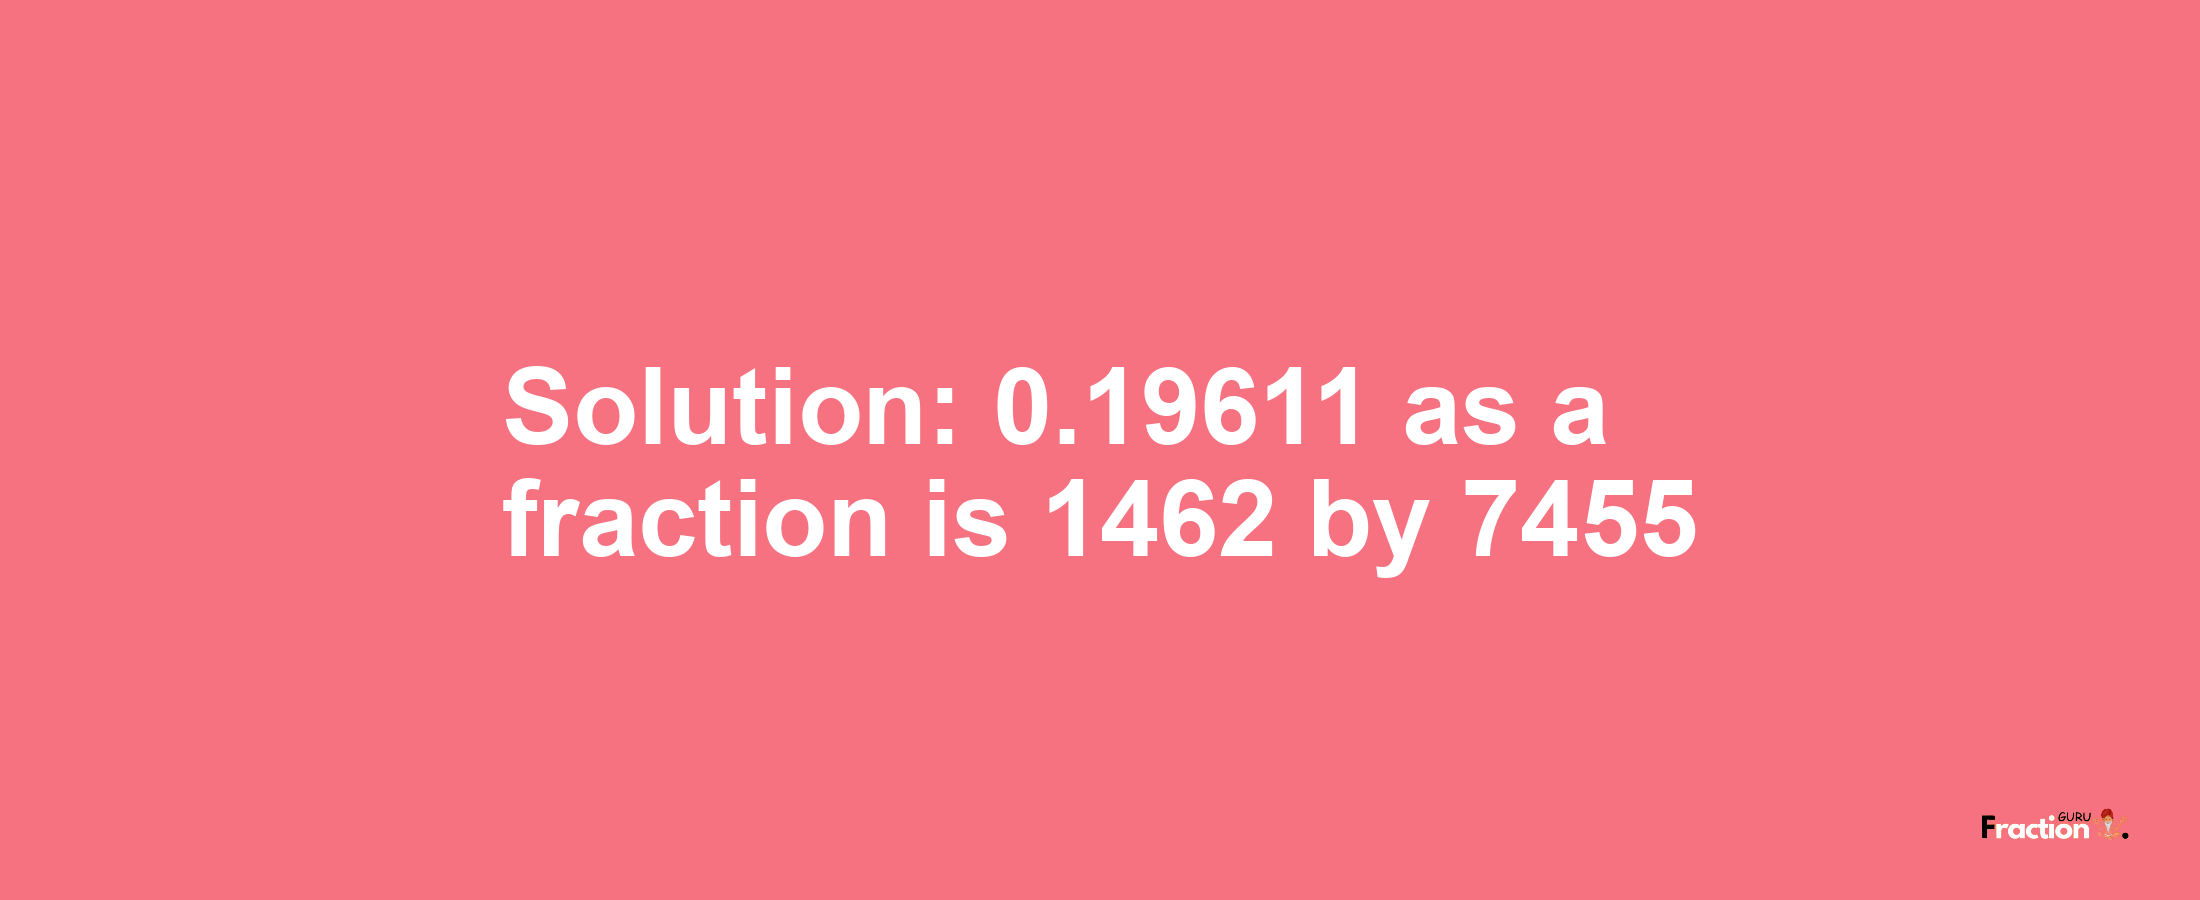 Solution:0.19611 as a fraction is 1462/7455